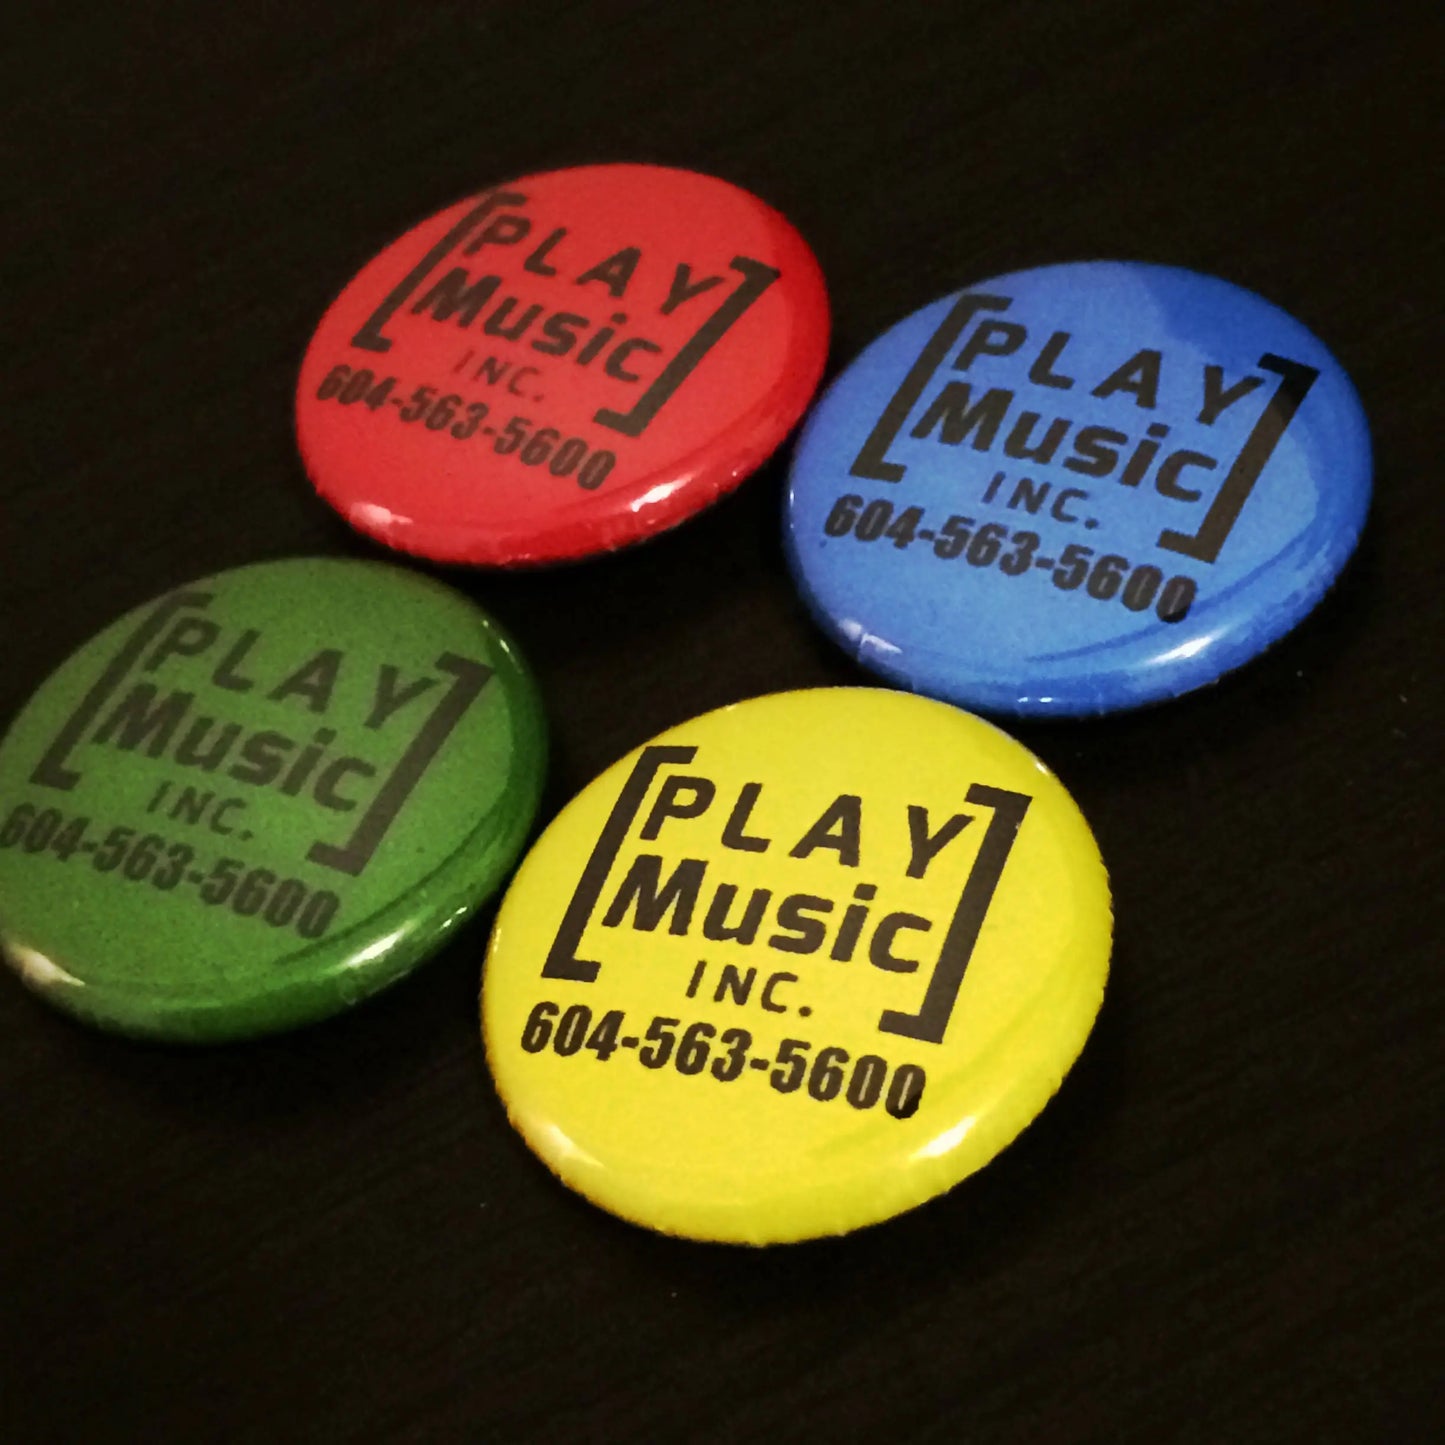 Personalized Button Magnets for Marketing - Promotions - Advertising - Favours  10 pcs busybeecreates